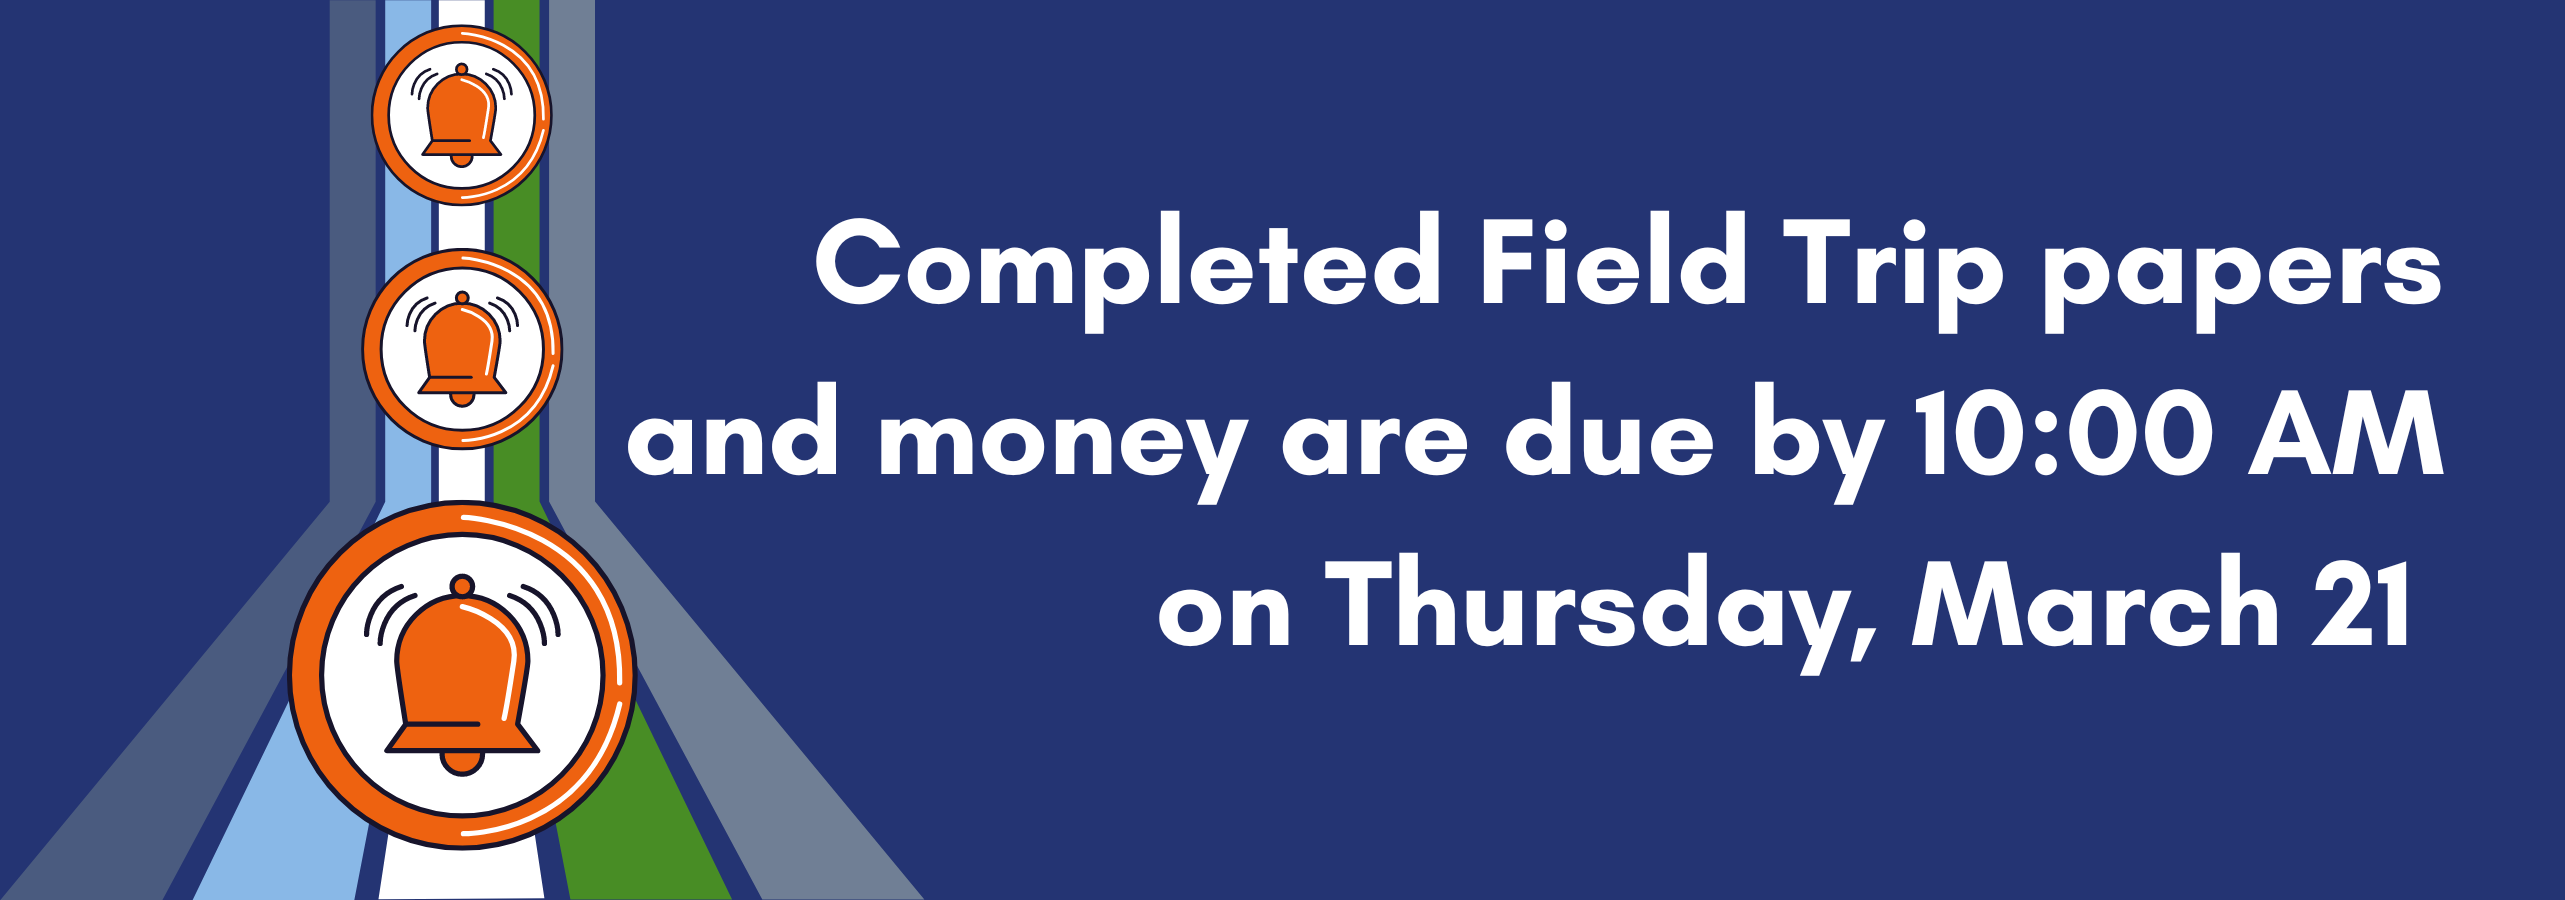 Field Trip deadline for forms and money is Thursday, March 21